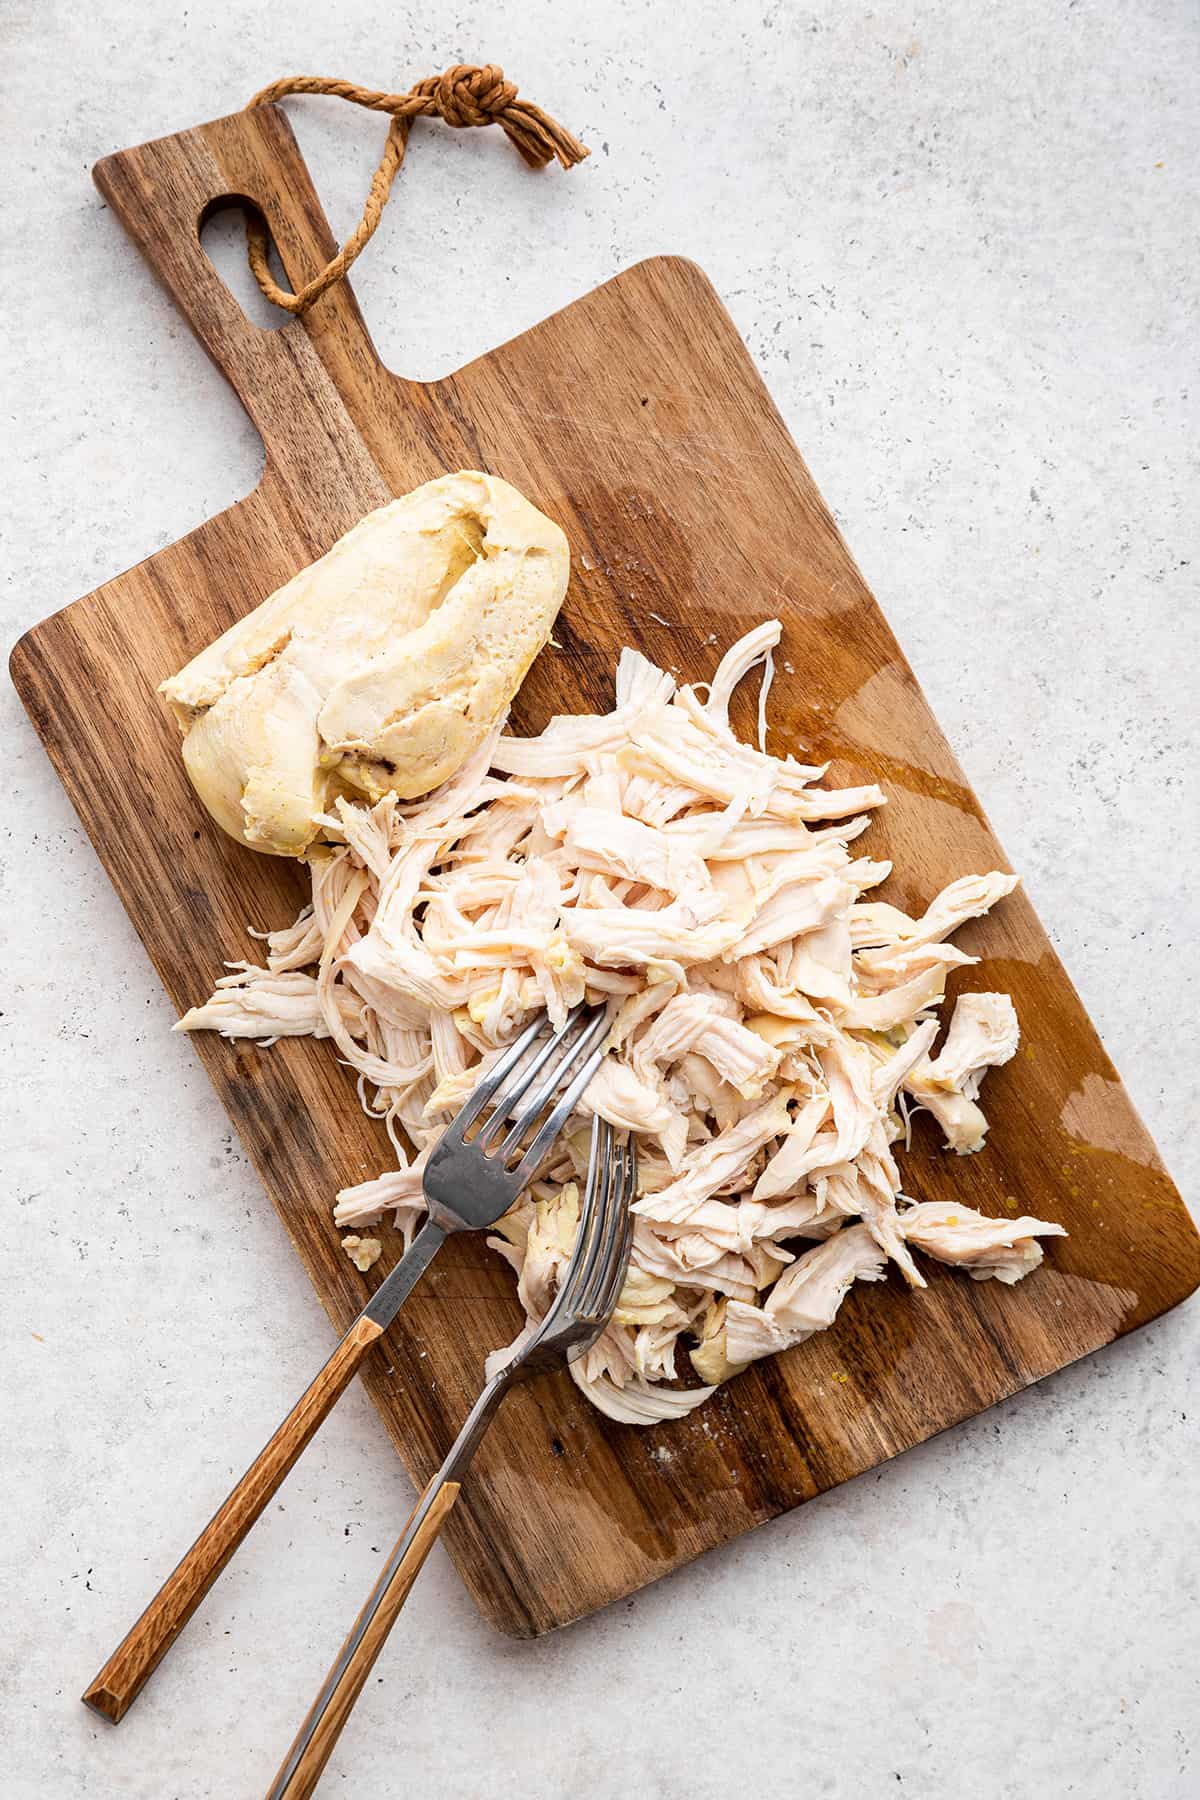 Overhead view of shredded chicken and forks on wood cutting board